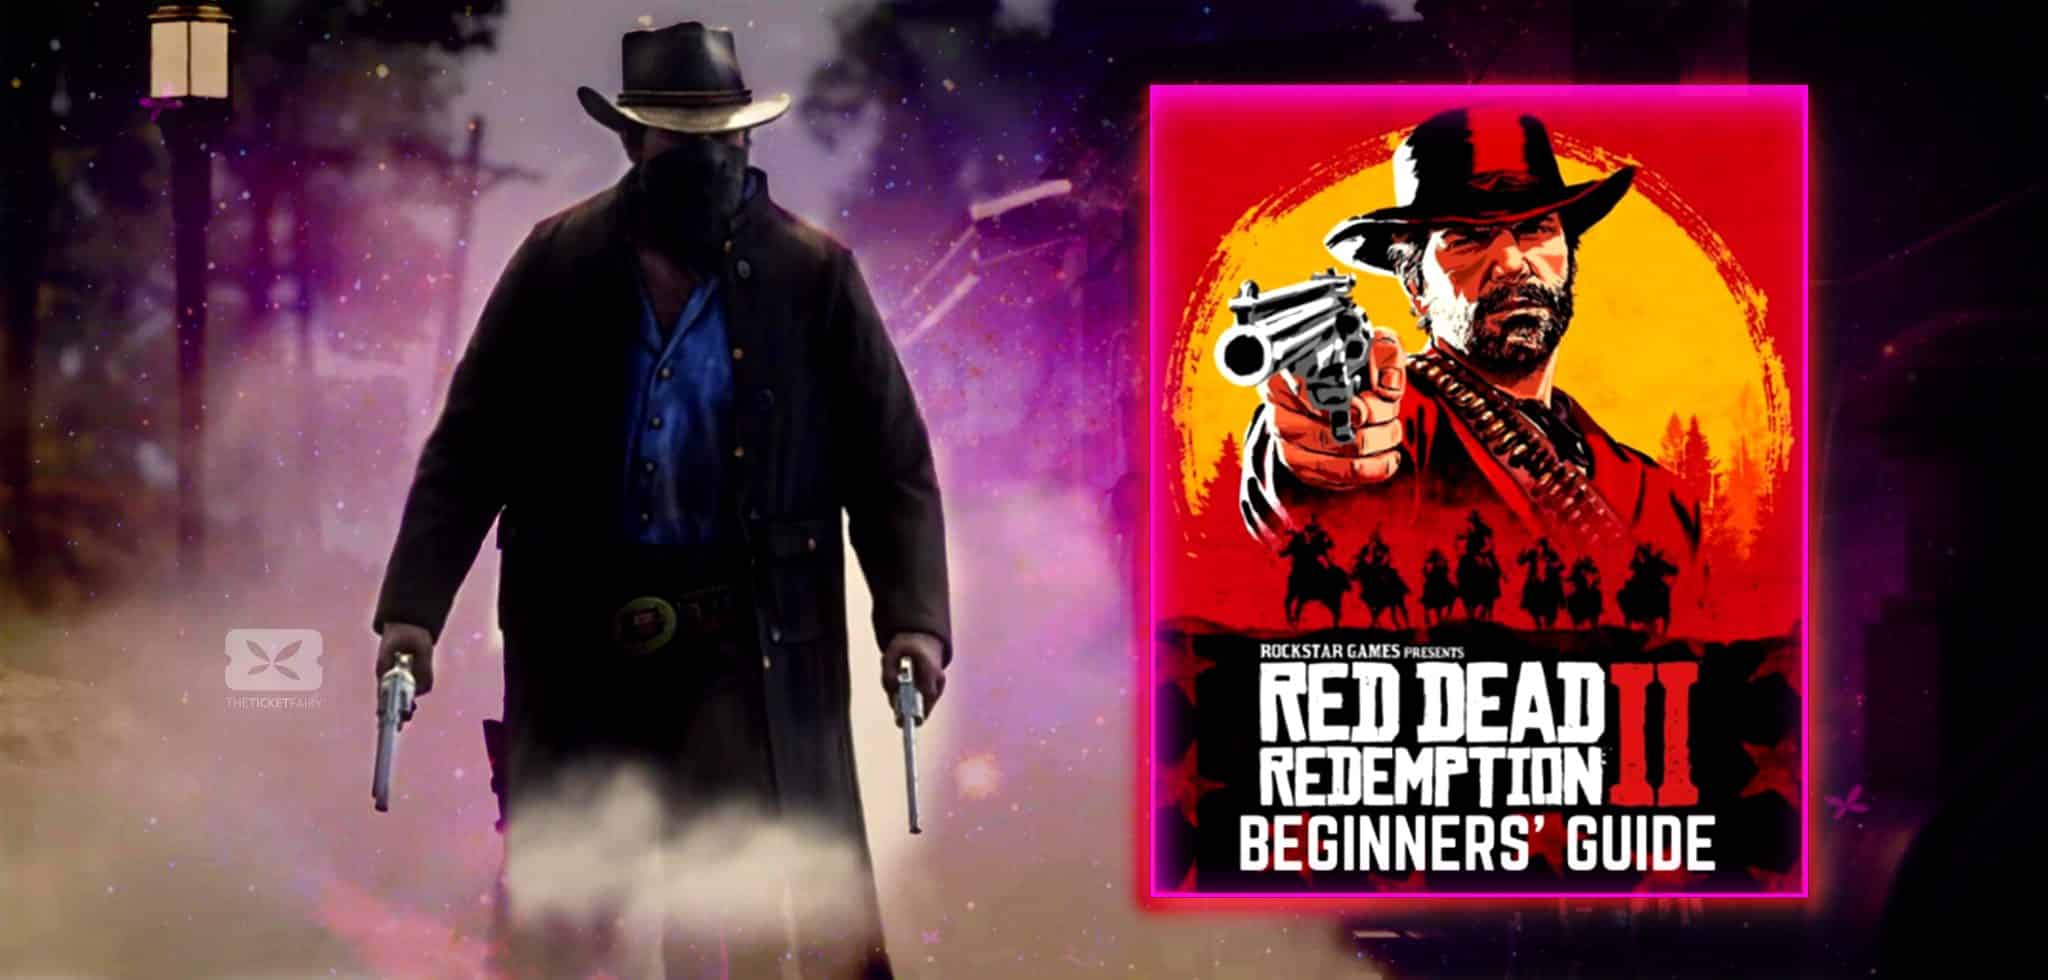 Tips & Tricks: A Red Dead Redemption 2 for Beginners